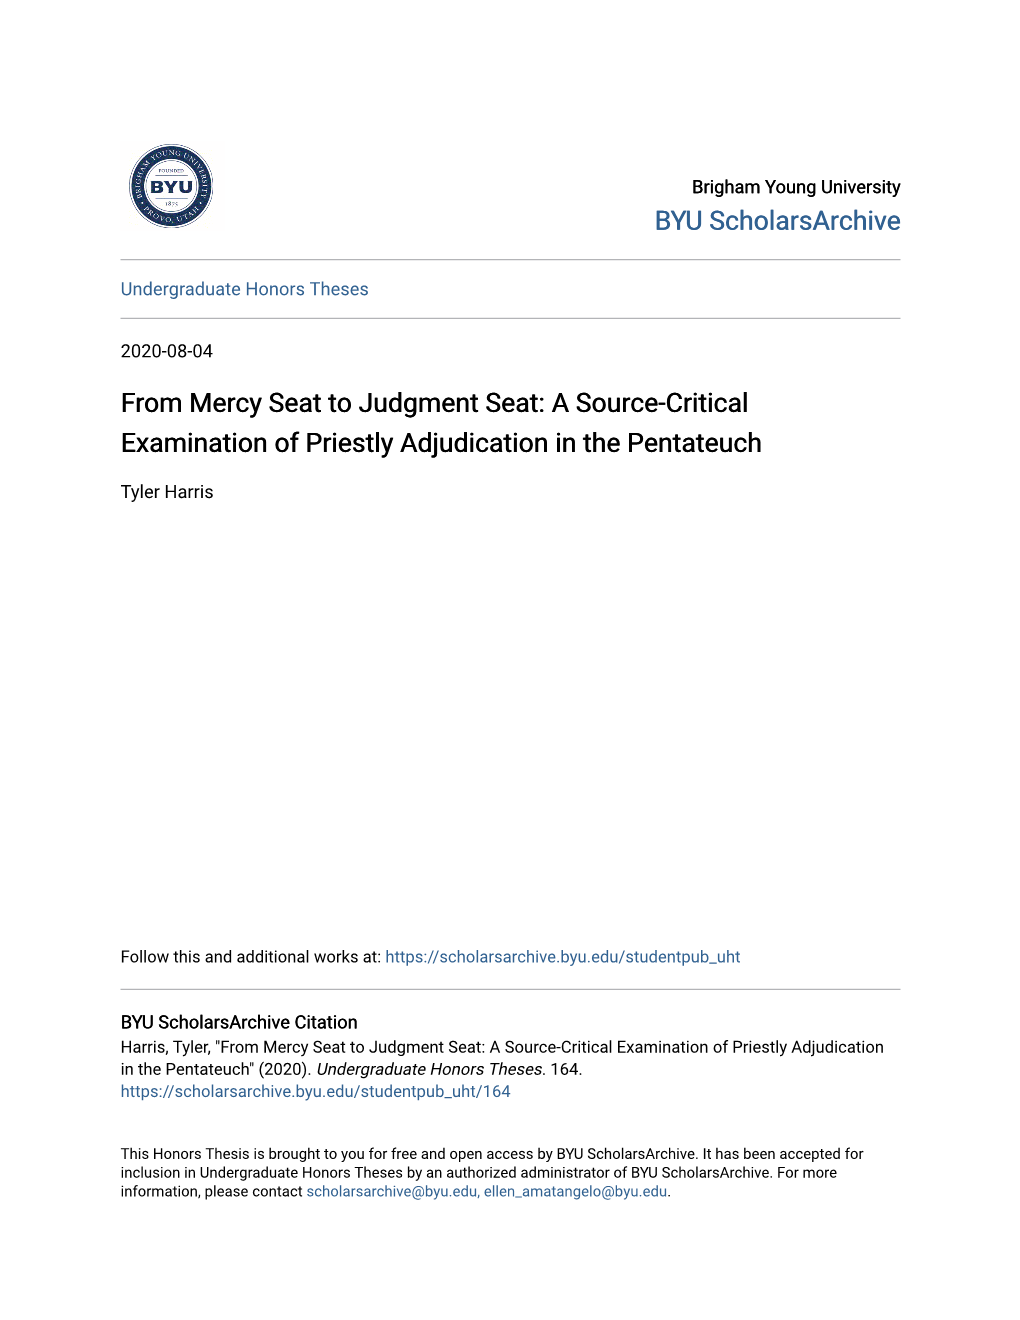 From Mercy Seat to Judgment Seat: a Source-Critical Examination of Priestly Adjudication in the Pentateuch